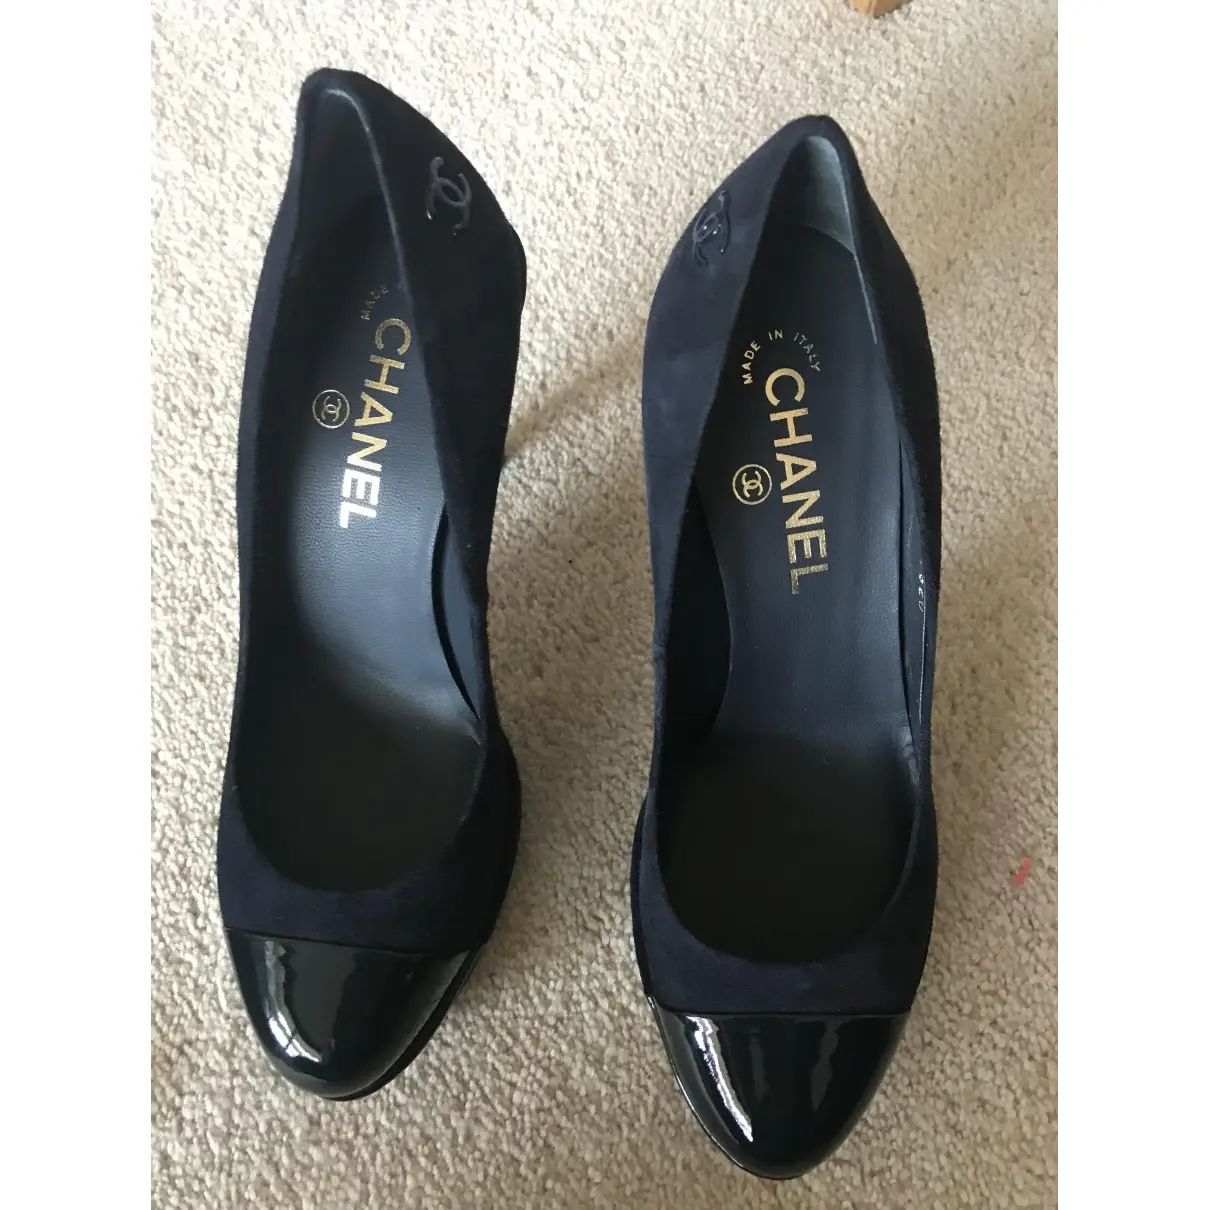 Chanel Heels for sale